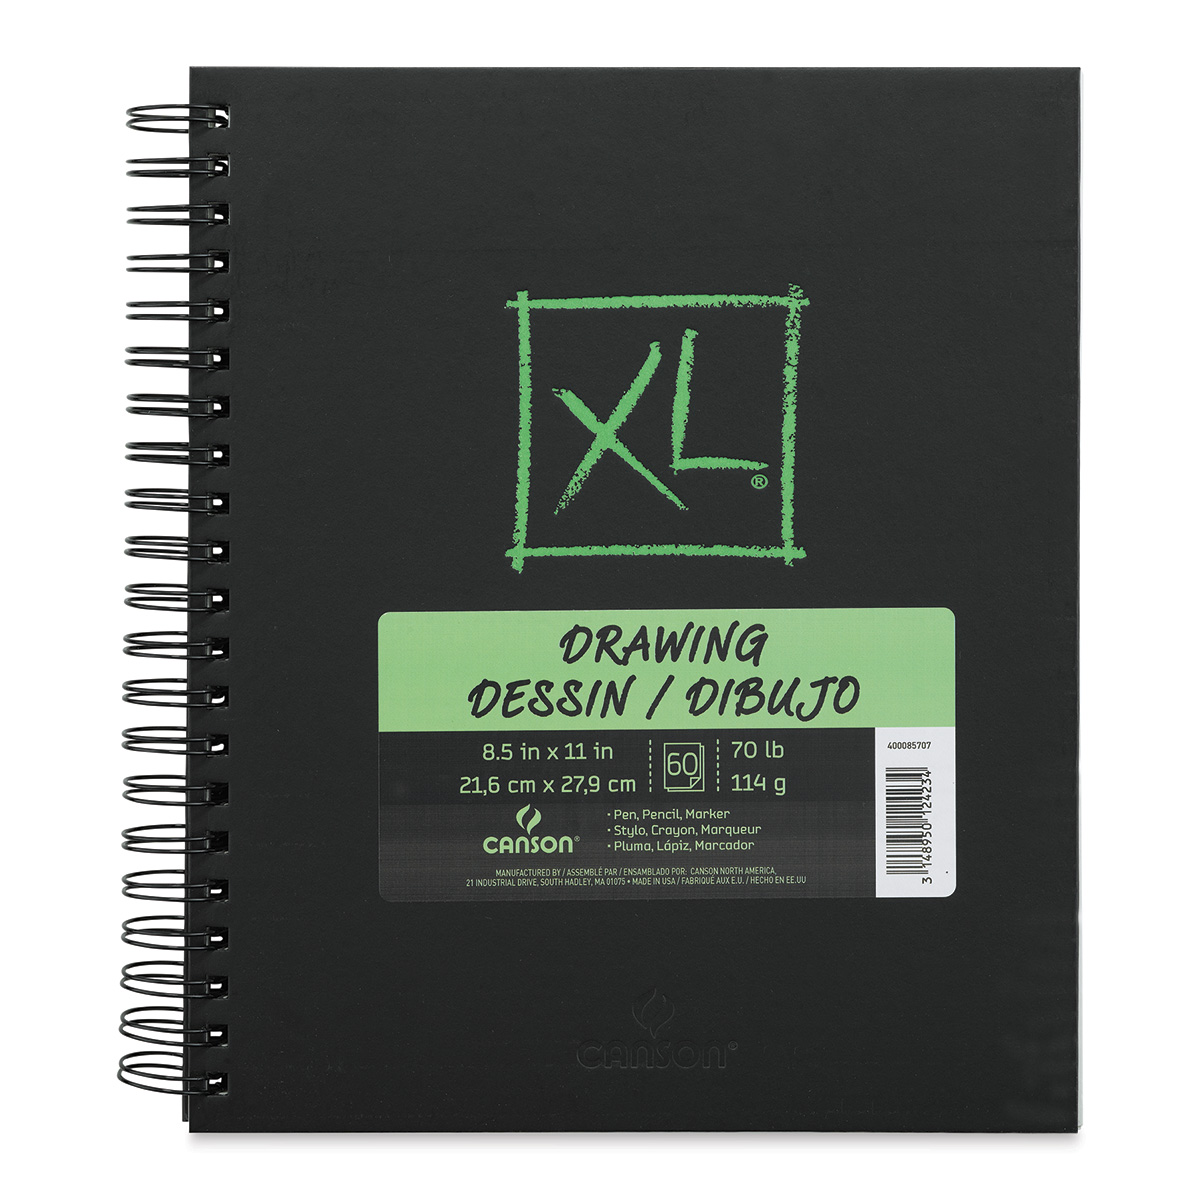 Sketch Book, Journaling Notebooks & Drawing Books India